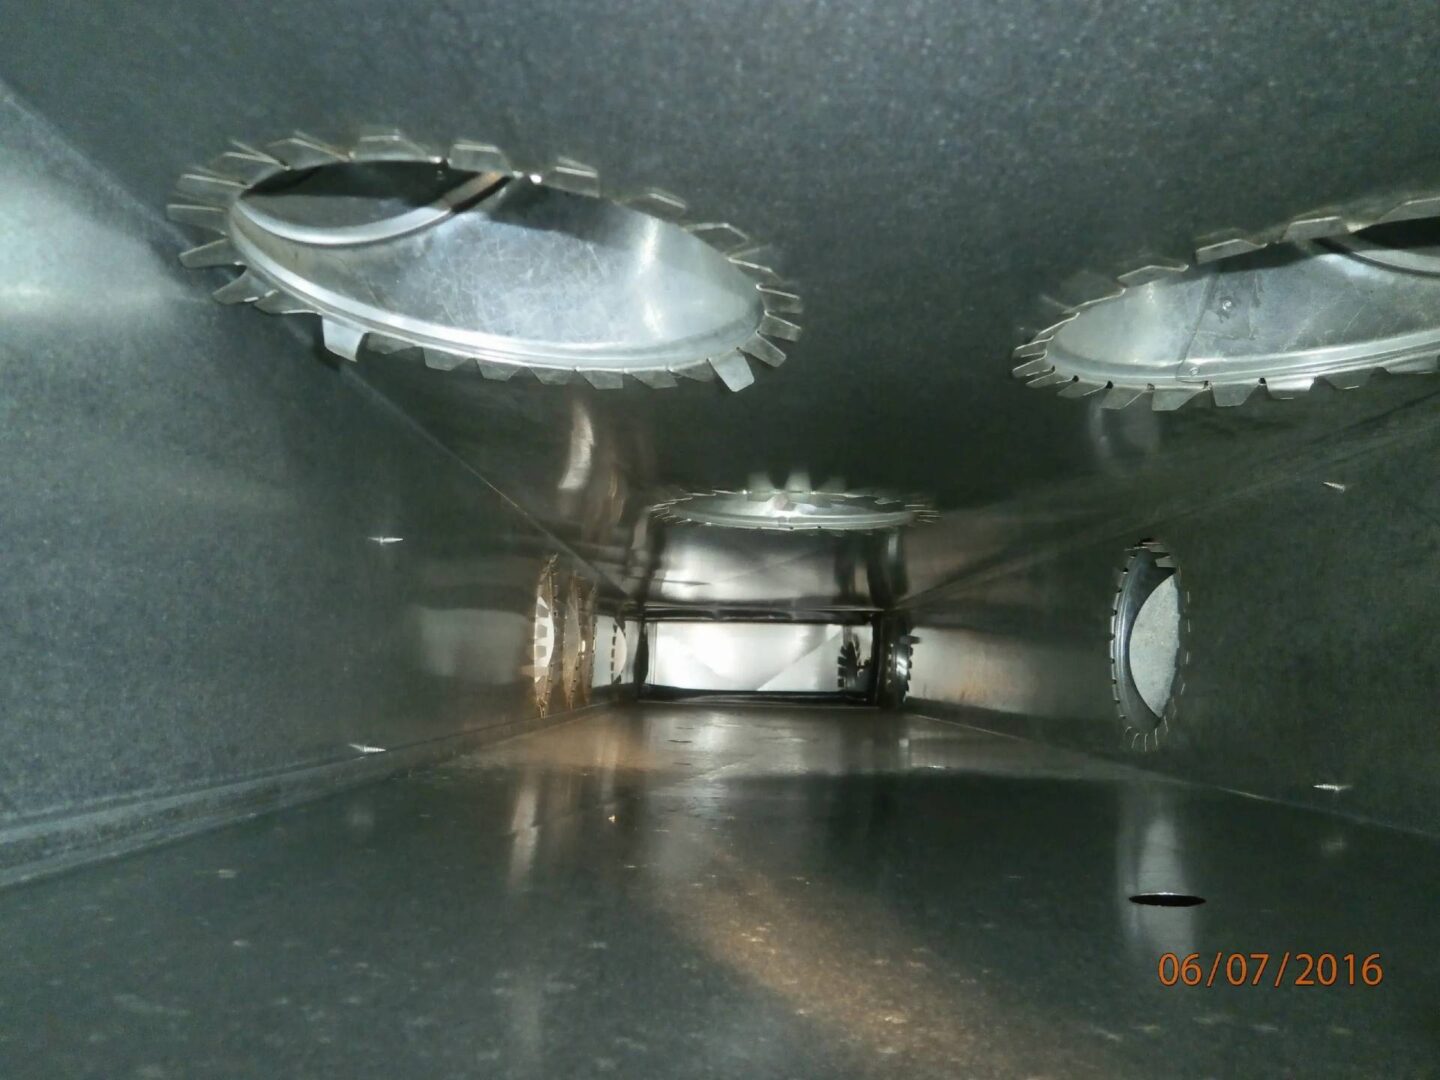 A-1 Furnace & Duct Cleaning LLC